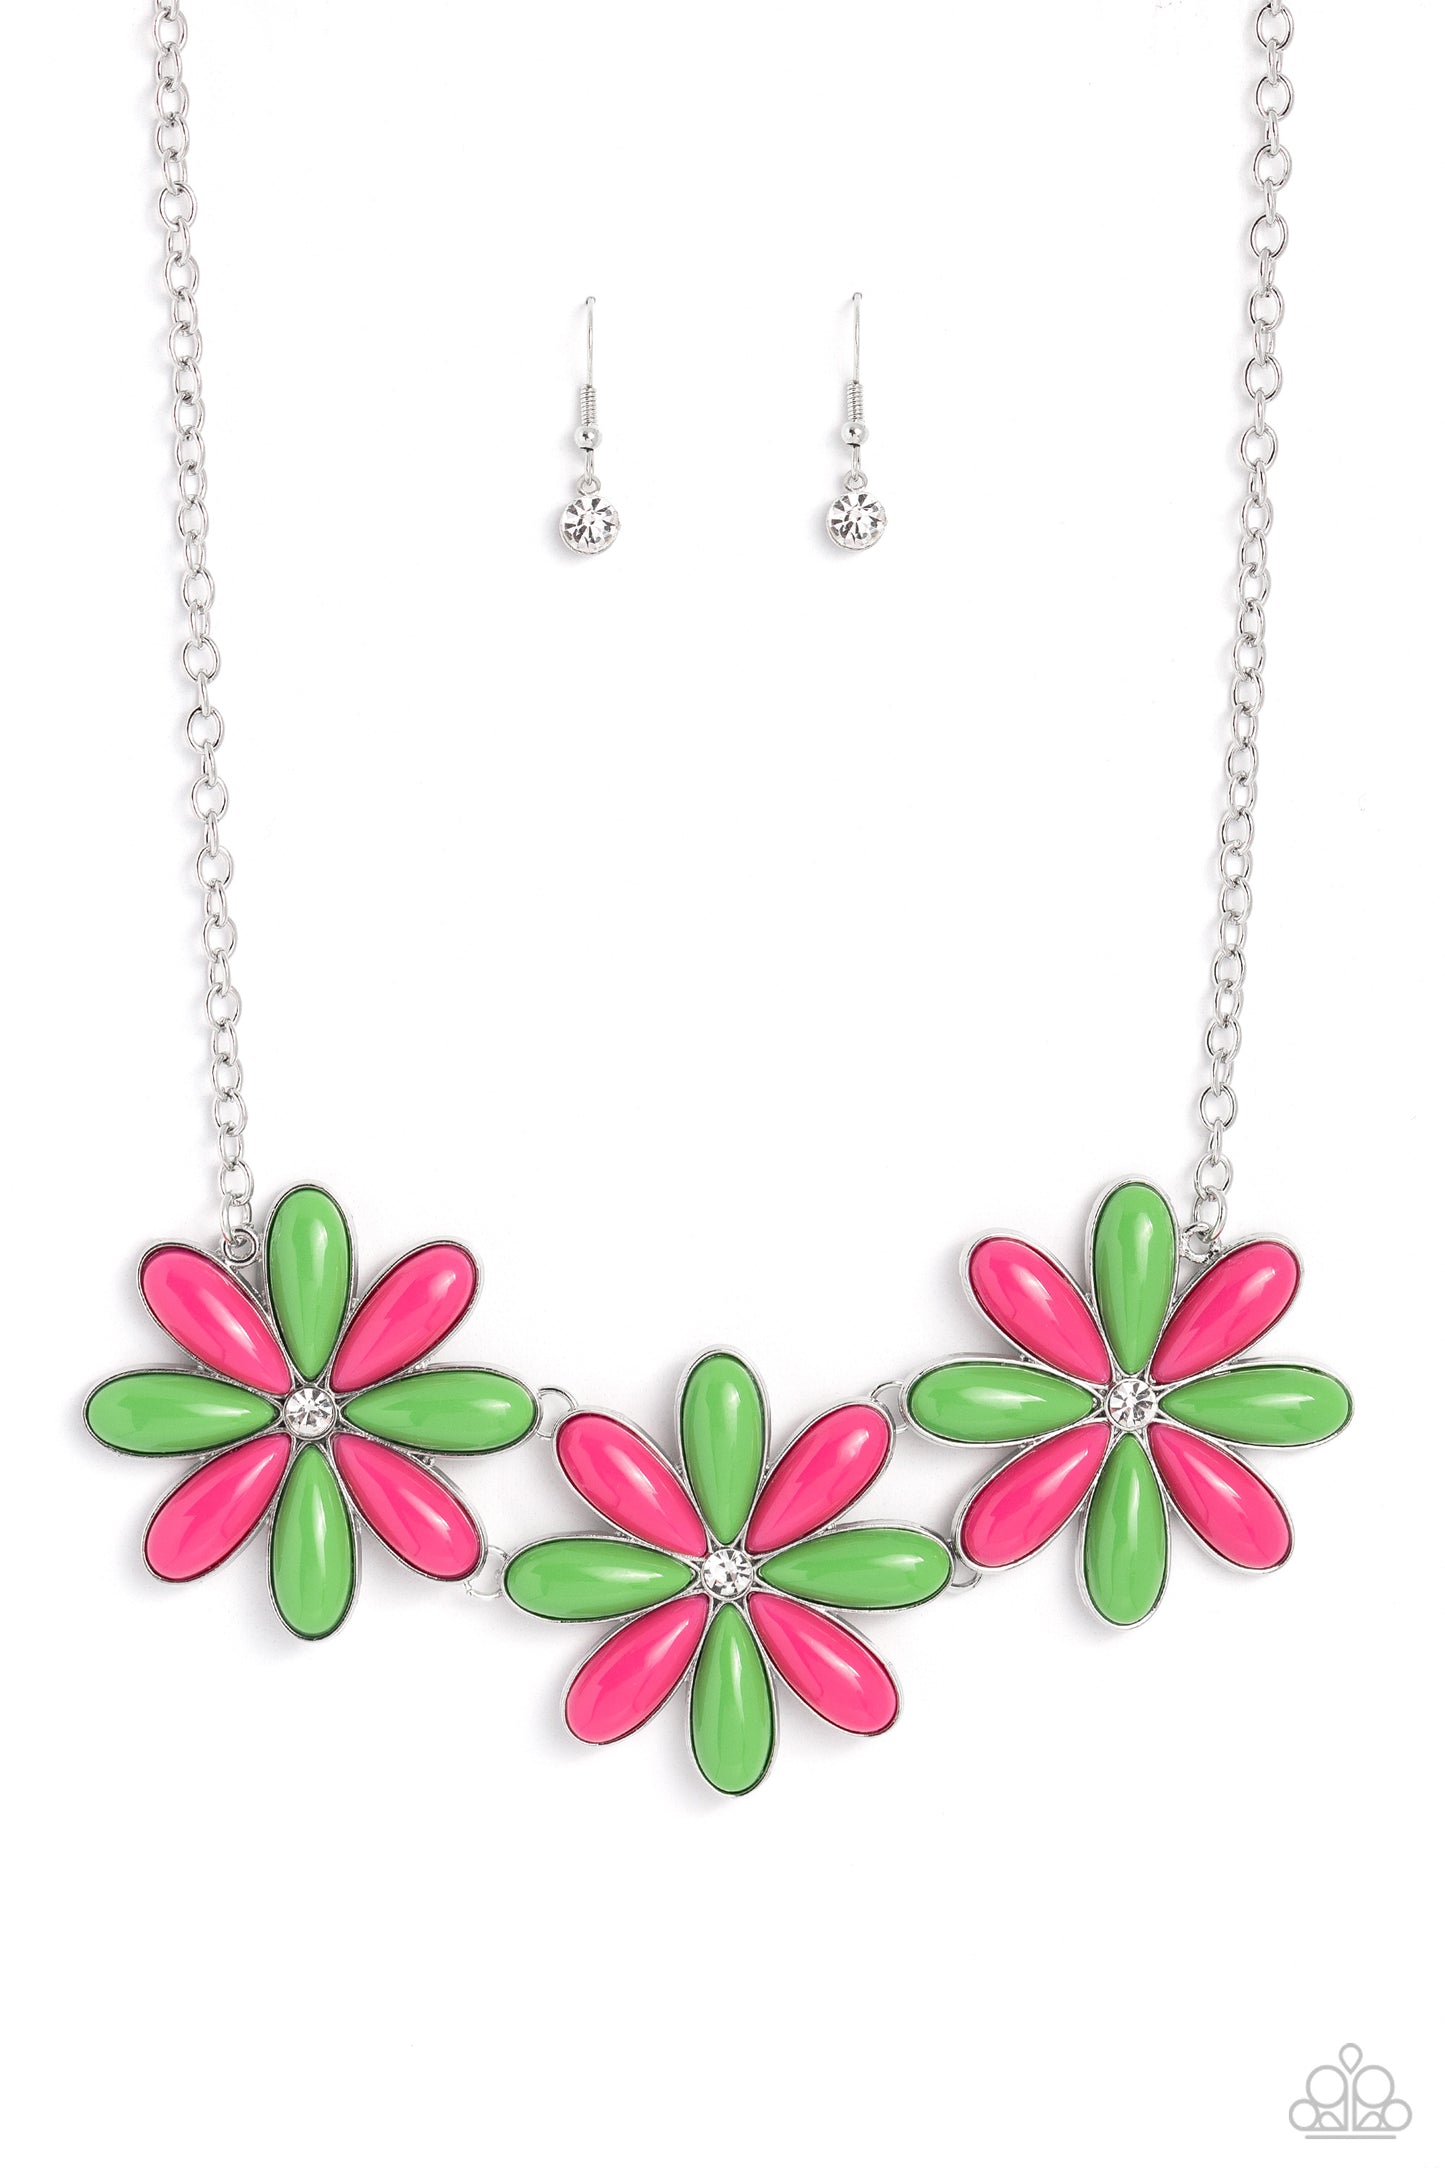 Dotted with white rhinestone centers, an elongated assortment of Classic Green and Pink Peacock beaded flowers link below the collar for a playful pop of color. Features an adjustable clasp closure.  Sold as one individual necklace. Includes one pair of matching earrings.